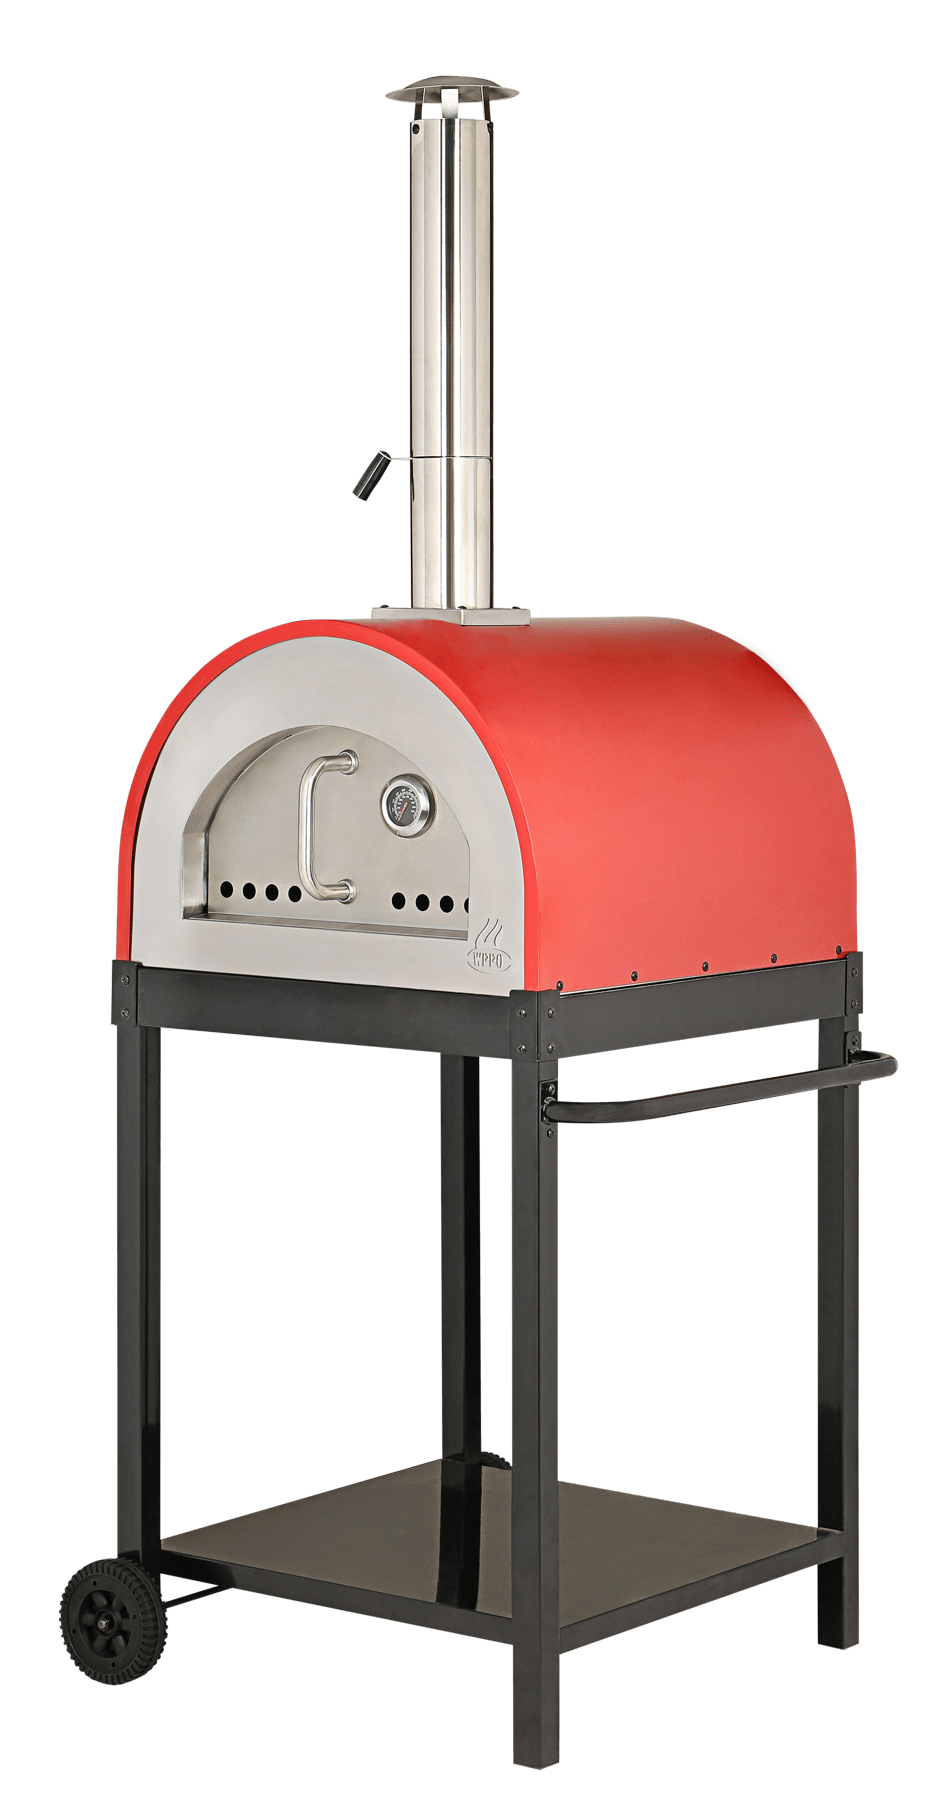 WPPO Pizza Ovens WPPO Karma 25-Inch Wood Fired or Gas Fired Pizza Oven / Traditional or Hybrid / WKE-04-RED, WKE-04-RED, WKE-04G-BLK, WKE-04G-RED